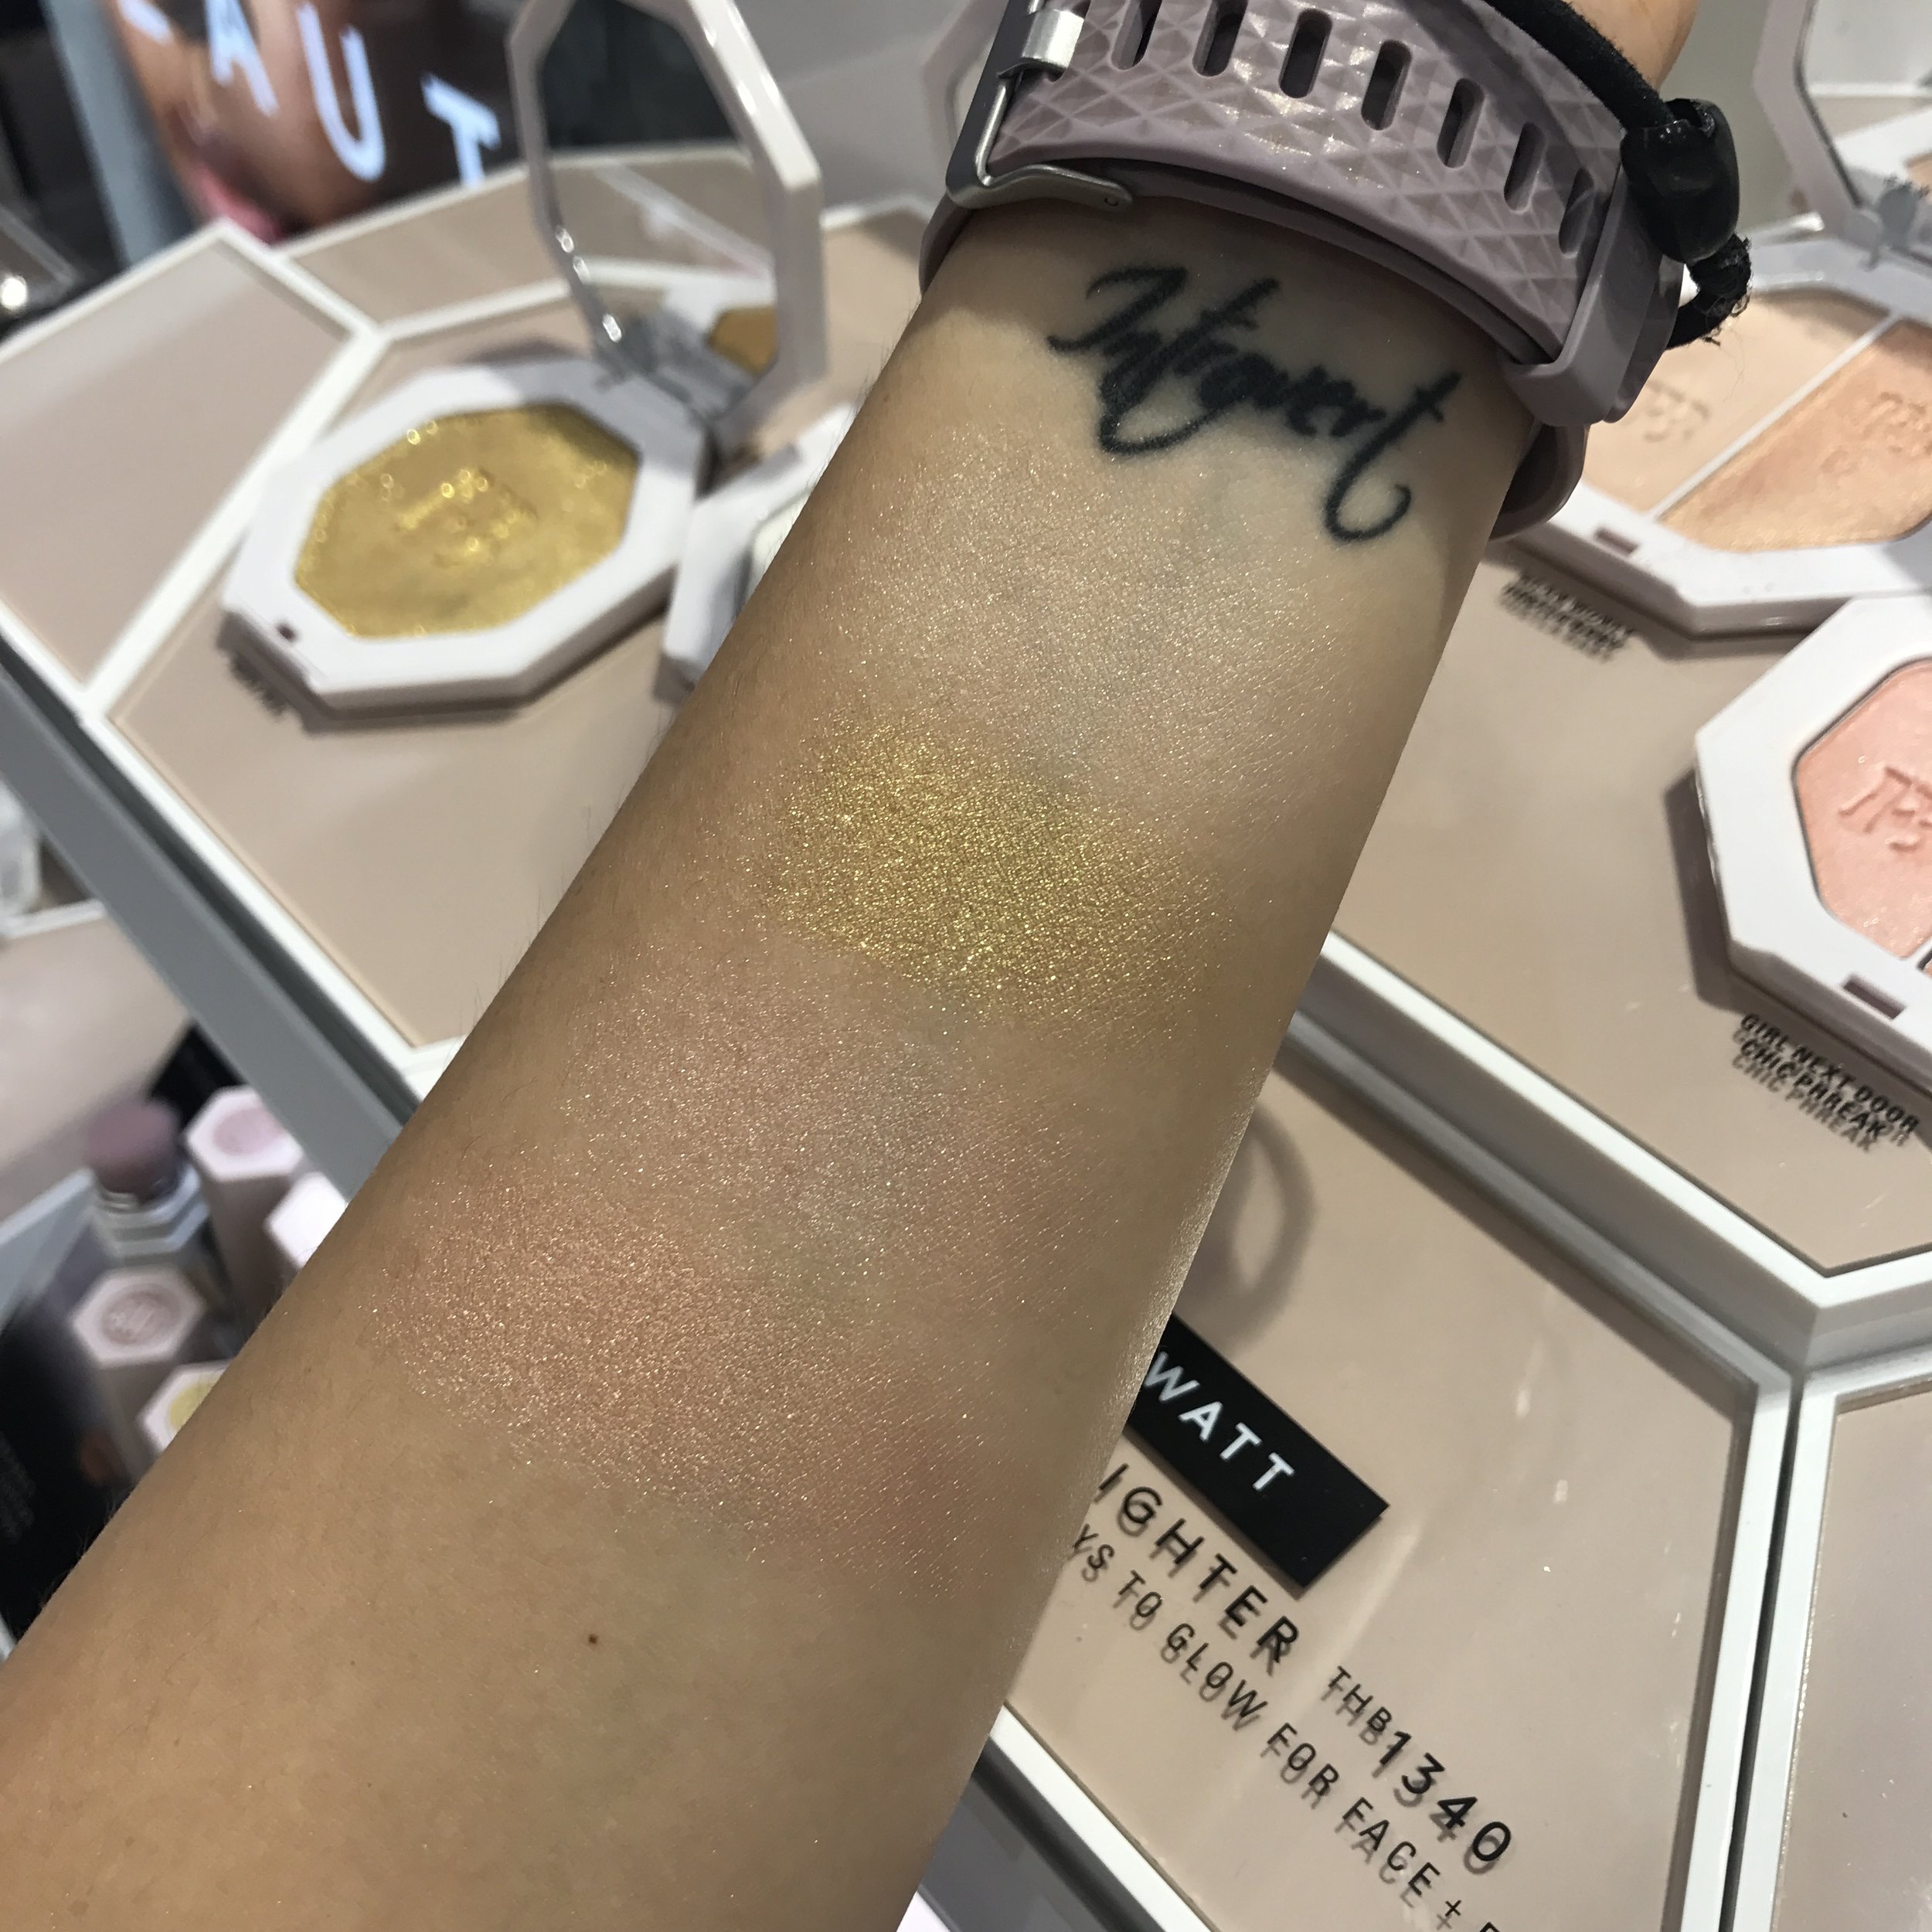 Preference Hospital retfærdig Fenty Beauty Haul - Reviews and Swatches! — Survivorpeach